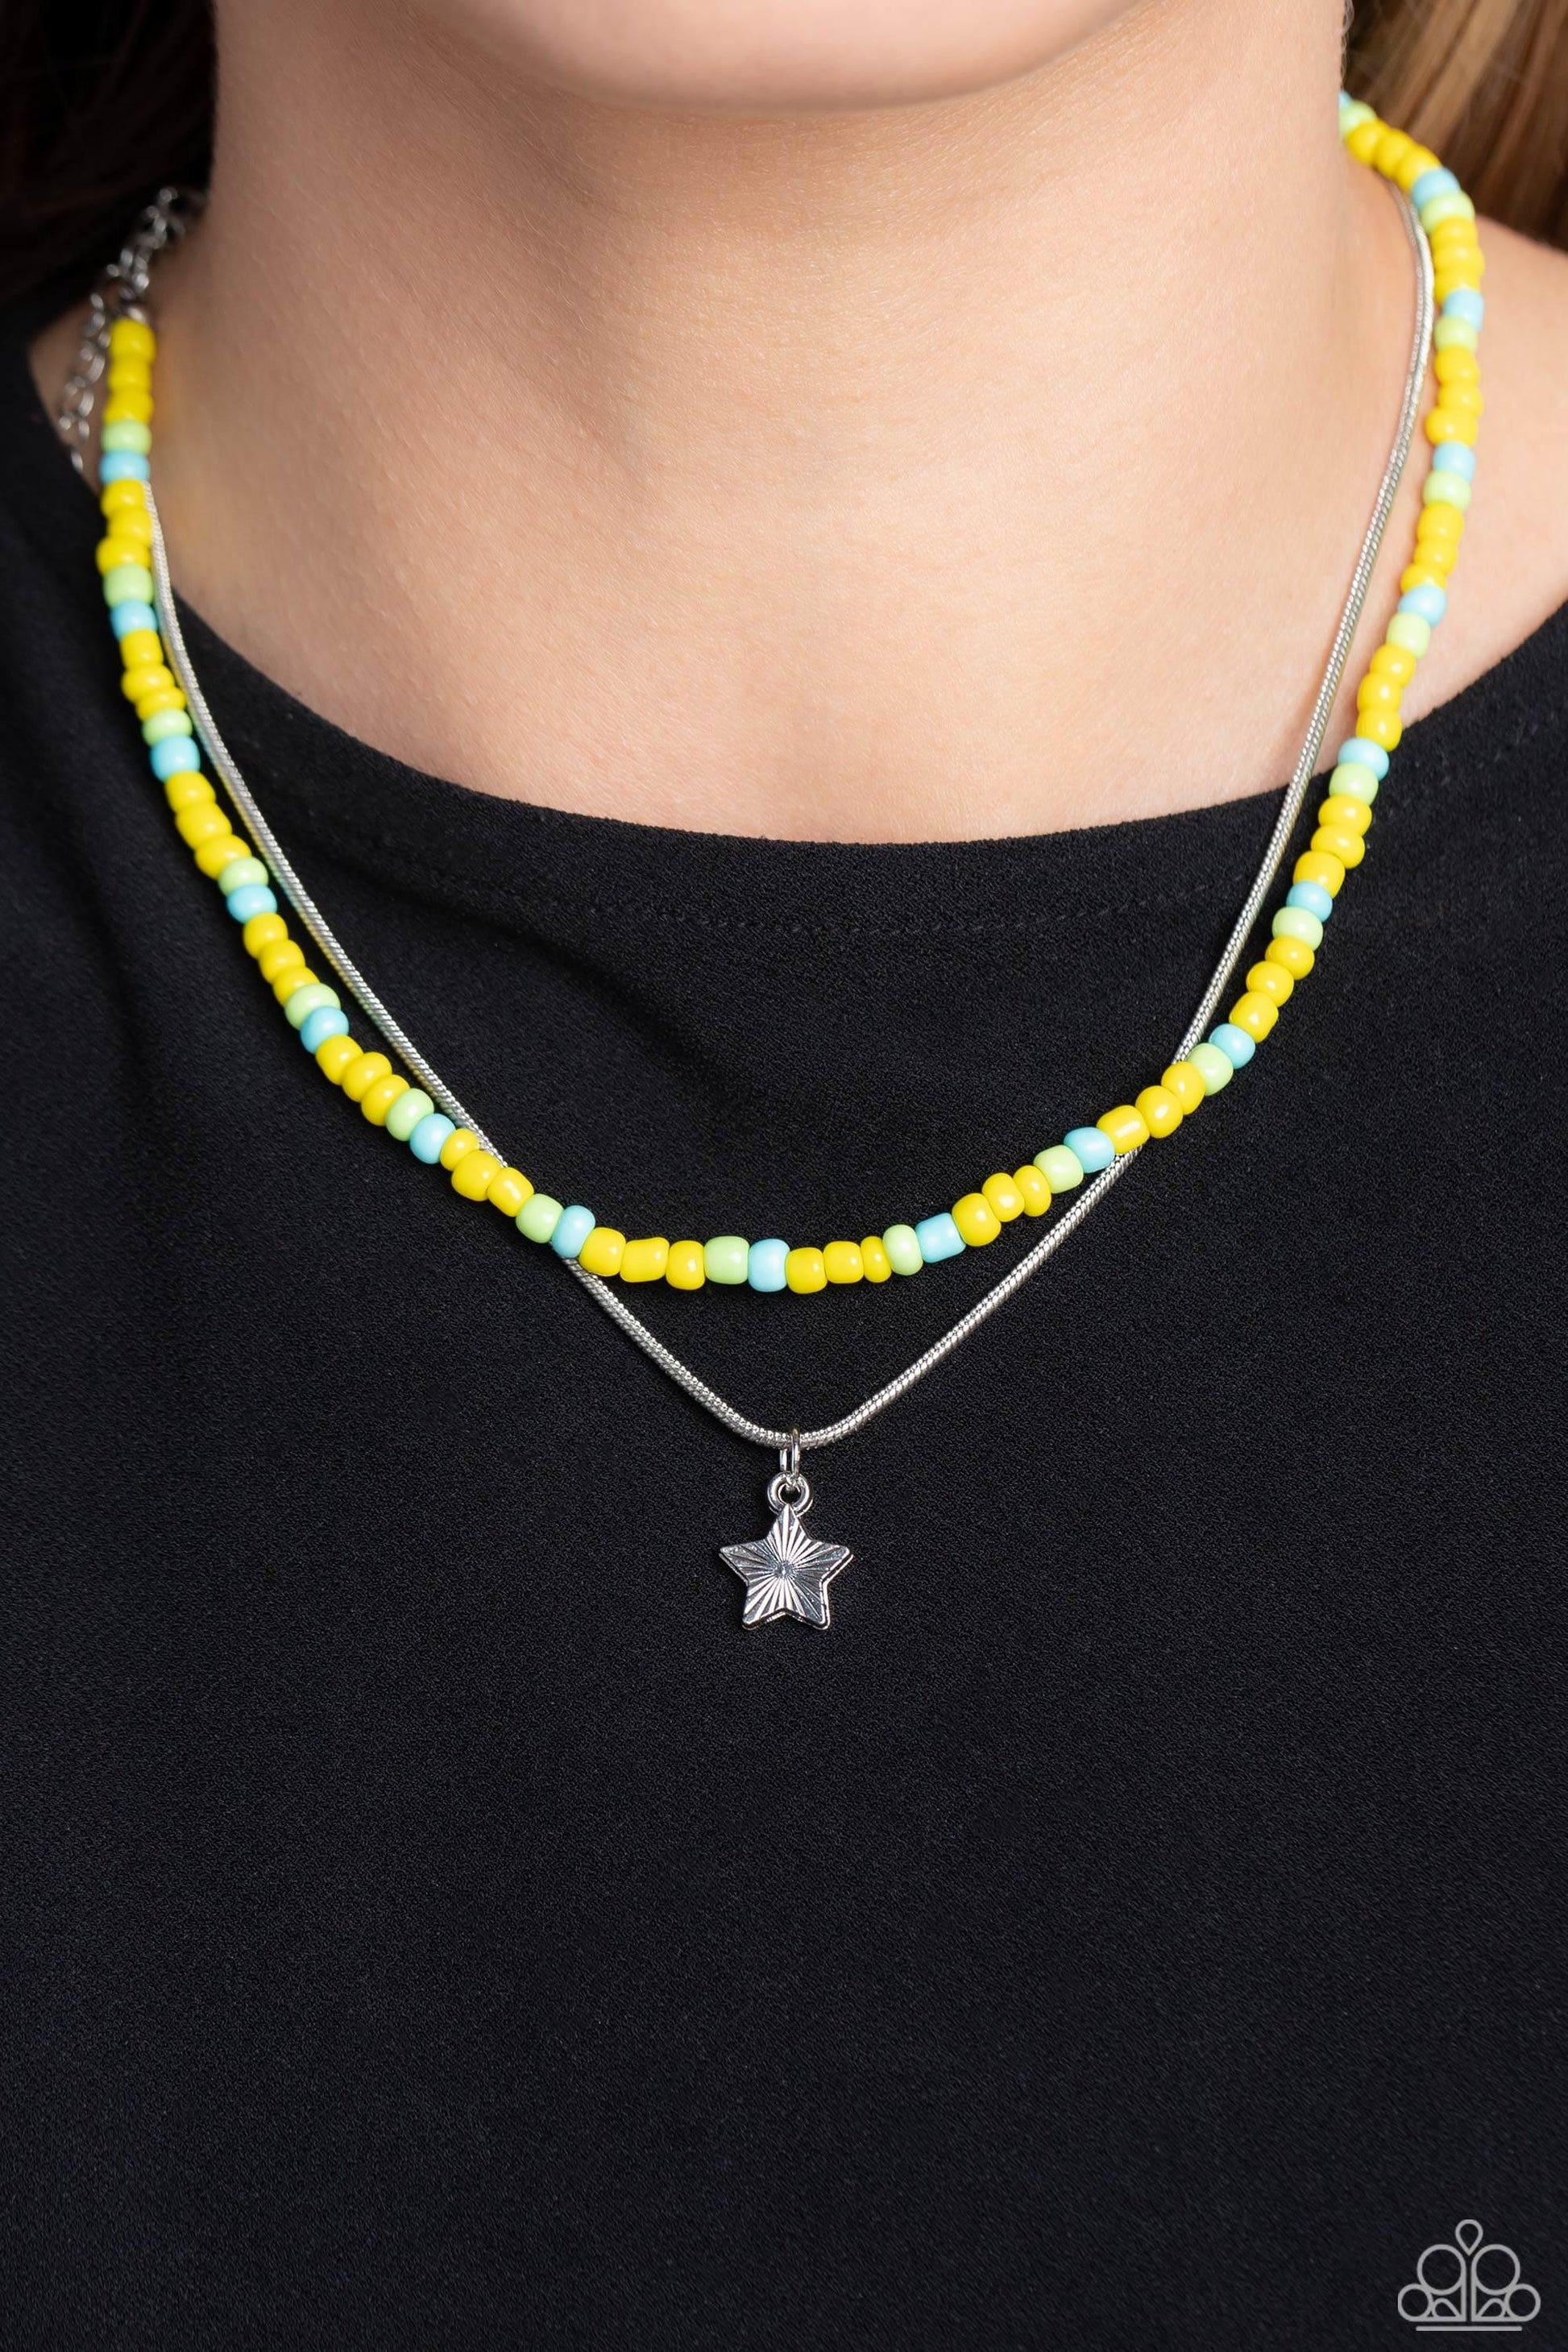 Paparazzi Accessories - Starry Serendipity - Yellow Necklace - Bling by JessieK